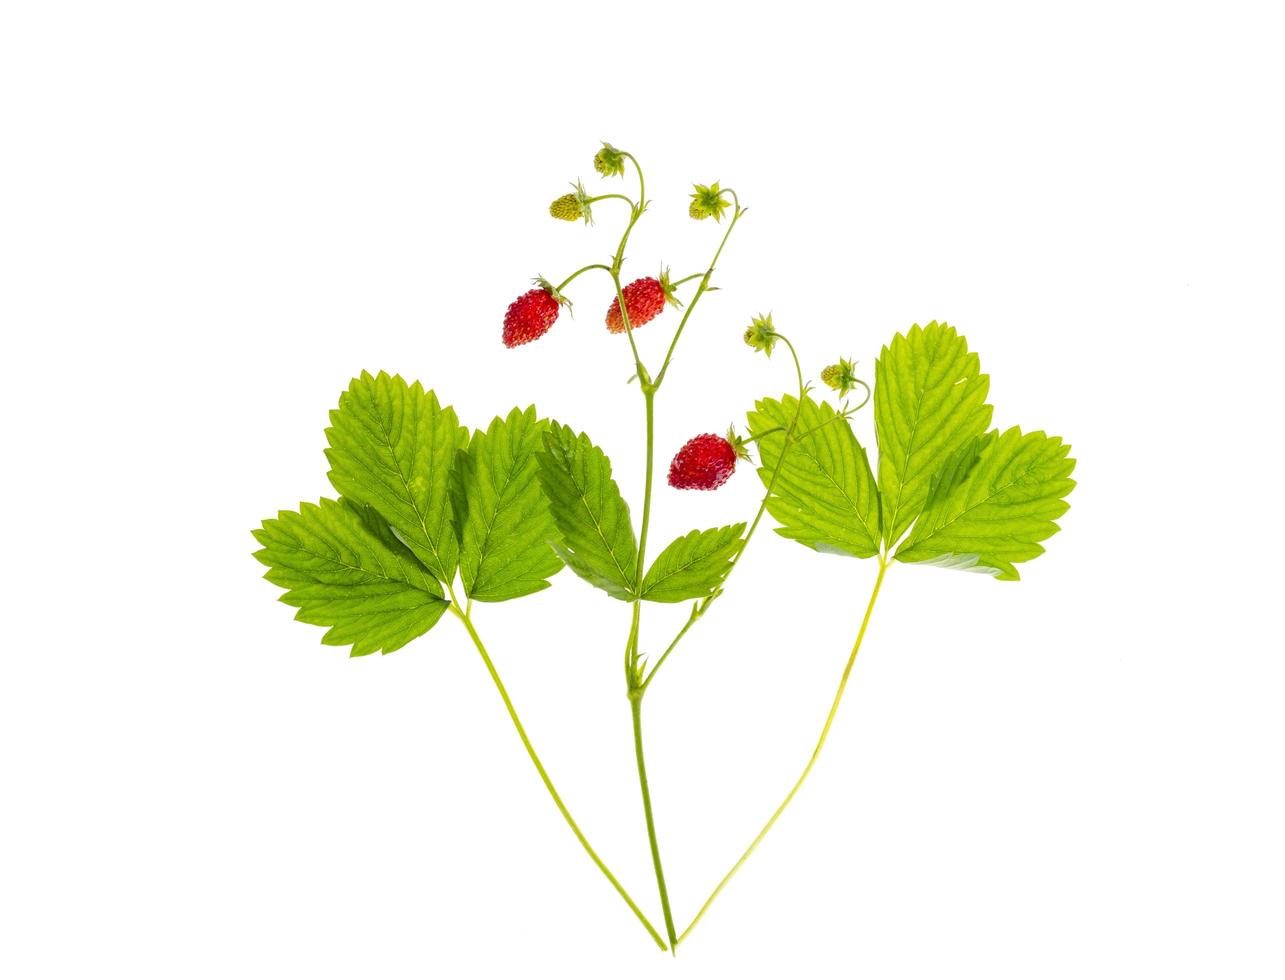 Strawberry branch with ripe red berries and green leaves photo